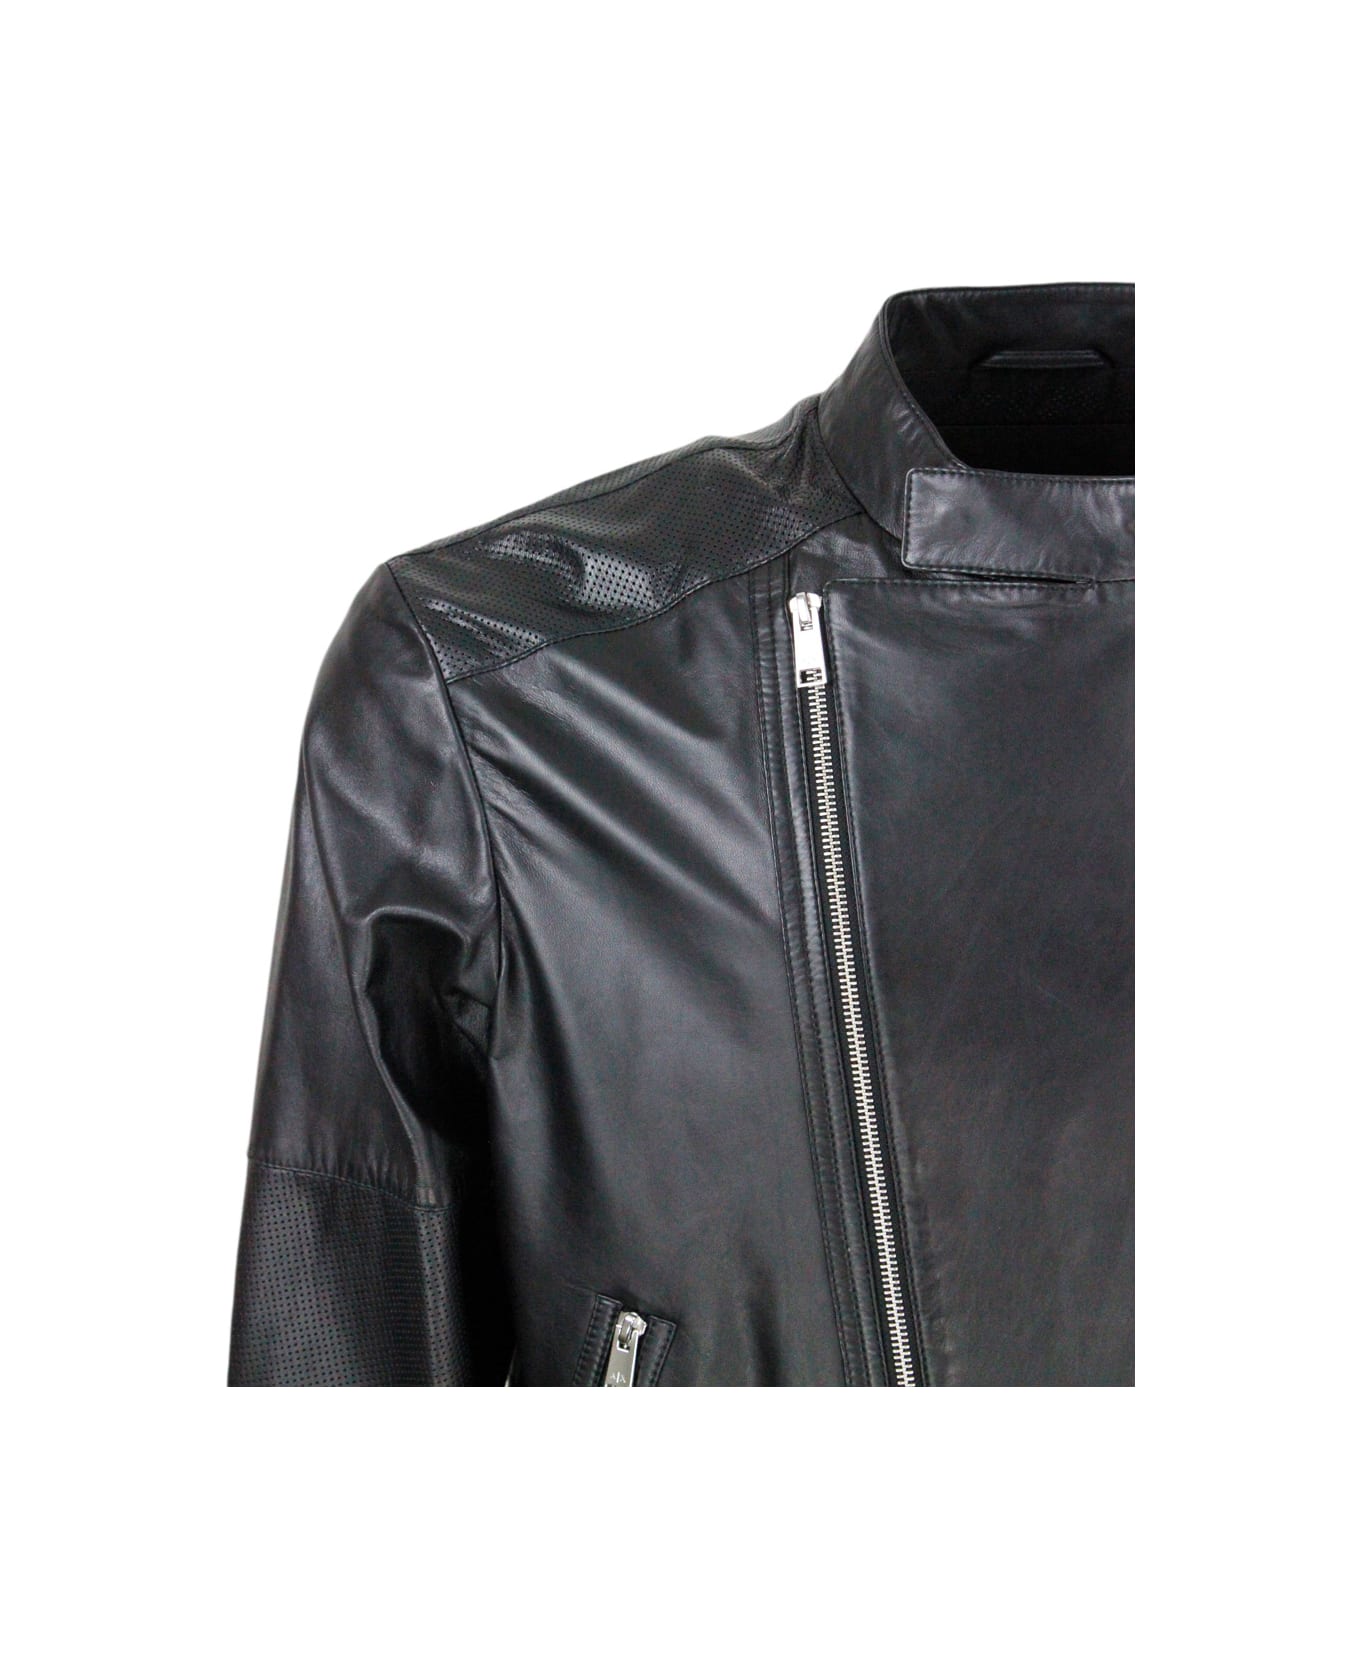 Armani Collezioni Jacket With Zip Closure Made Of Soft Lambskin With Perforated Leather Details. Zip On Pockets And Cuffs - Black レザージャケット